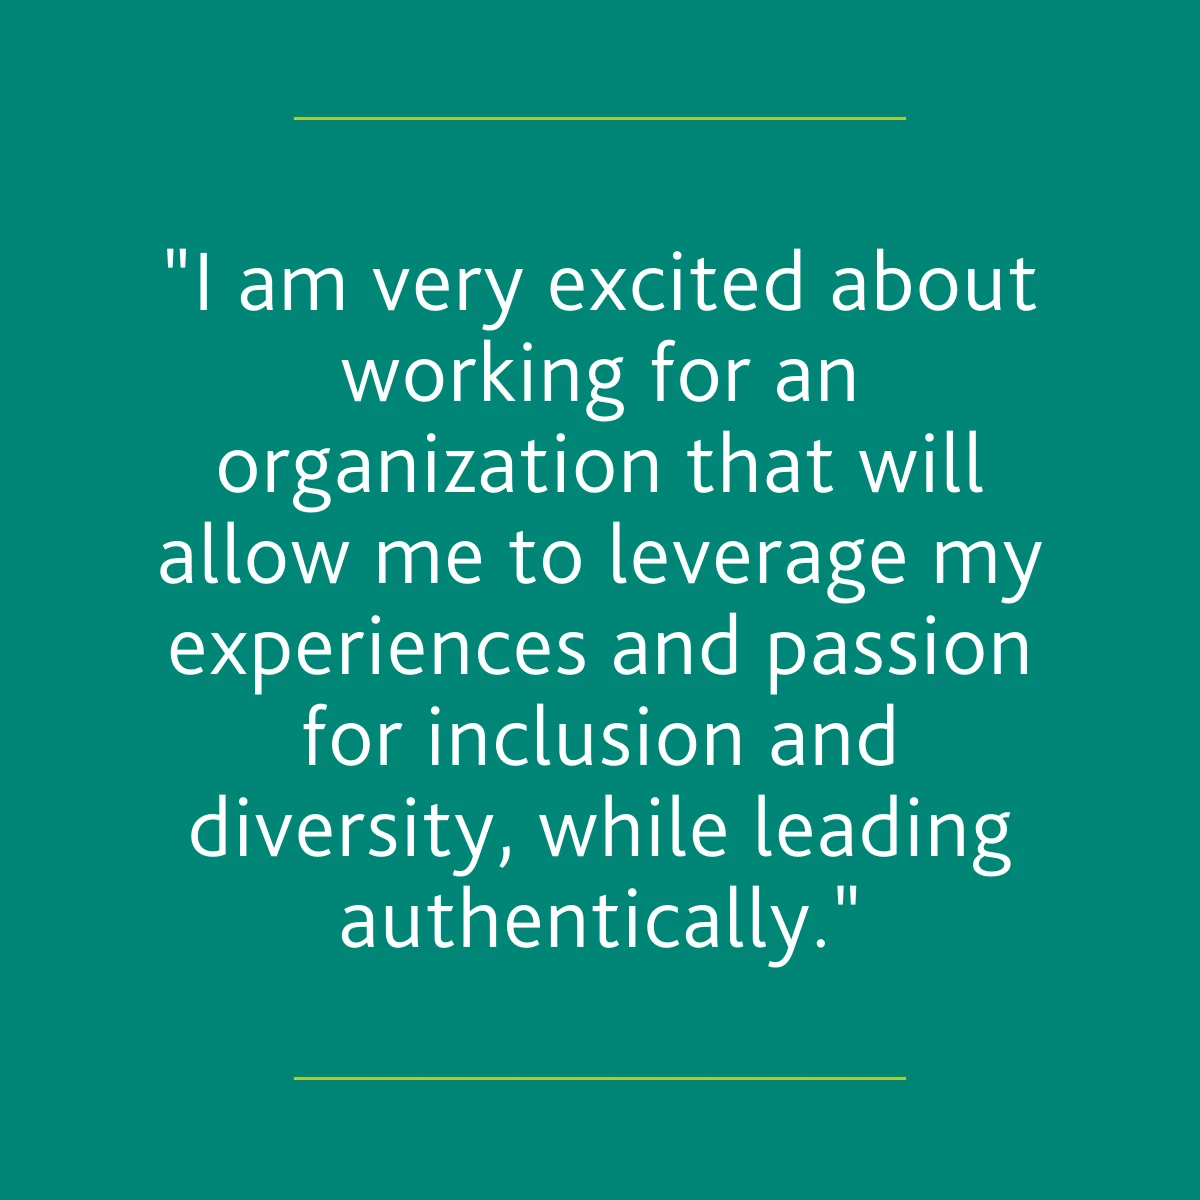 "I am very excited about working for an organization that will allow me to leverage my experiences and passion for inclusion and diversity, while leading authentically."